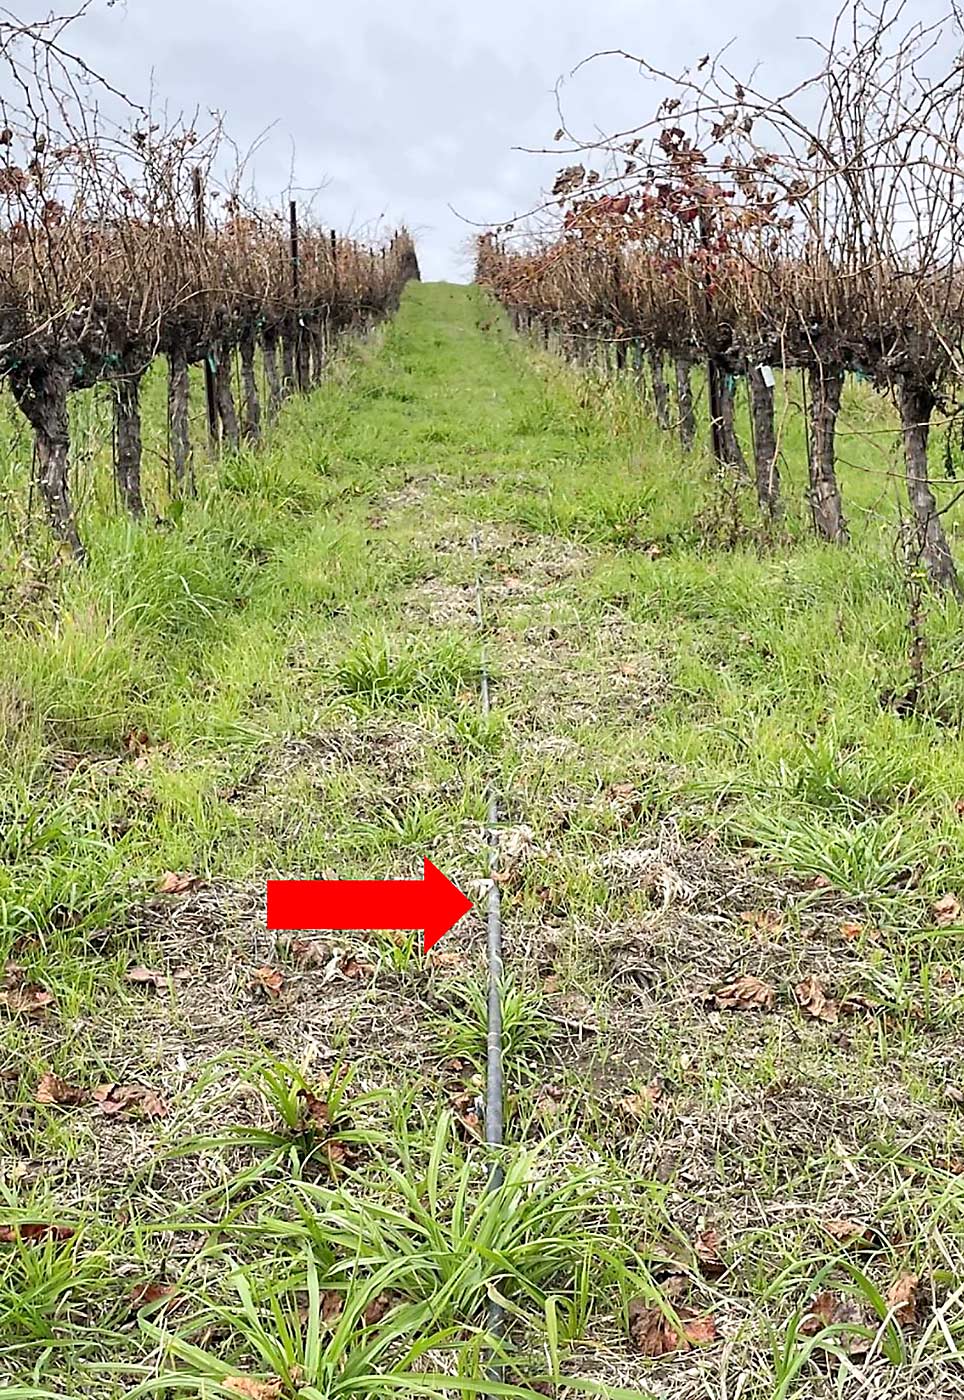 In California’s Central Coast region, grapevines are accustomed to wet winters and have grown their roots through the vineyard aisles, to take advantage of that soil moisture, unlike in drier climates where roots are concentrated under drip lines. That means during drought, it’s beneficial to irrigate the aisles as well as the rows (see arrow above pointing to irrigation line), said Ryan Scott, vineyard manager for Monterey Pacific. (Courtesy Ryan Scott/Monterey Pacific)